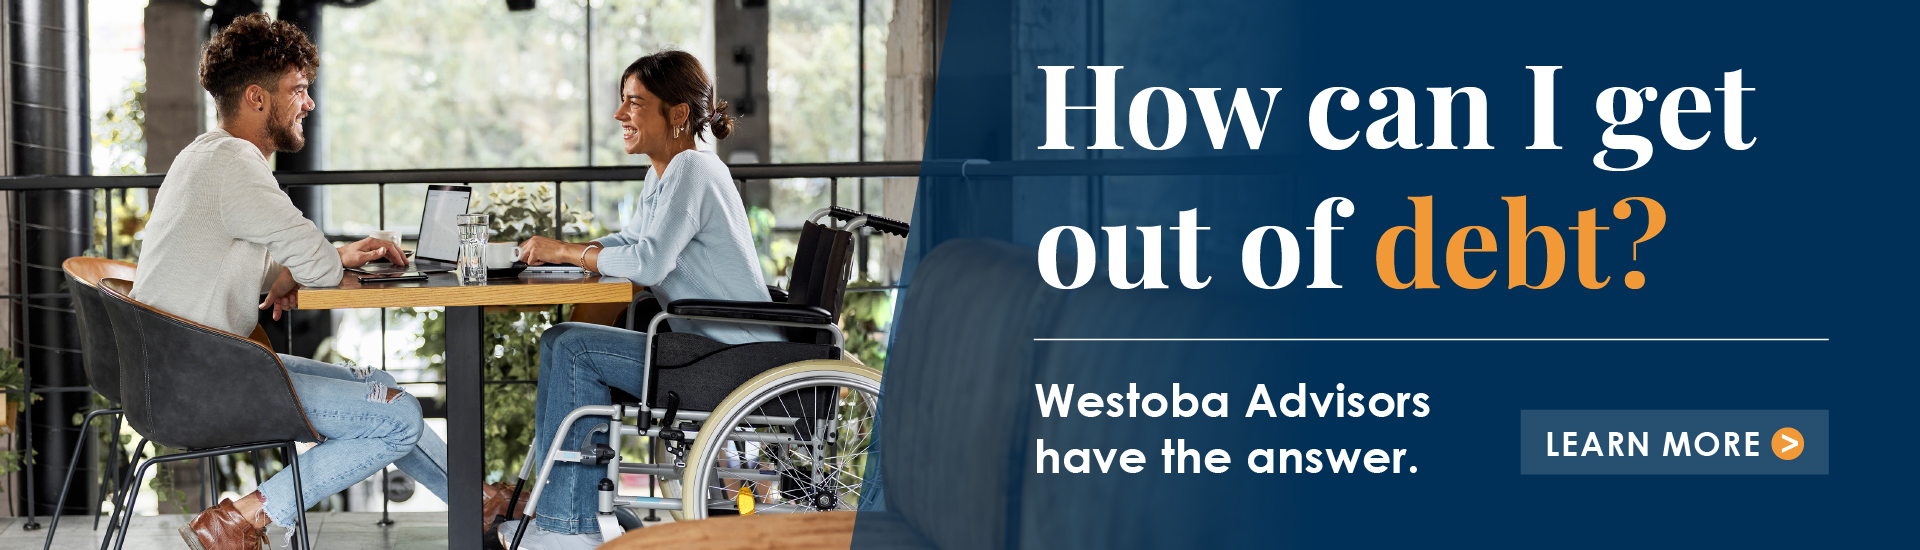 How can I get out of debt? Westoba Advisors have the answer.